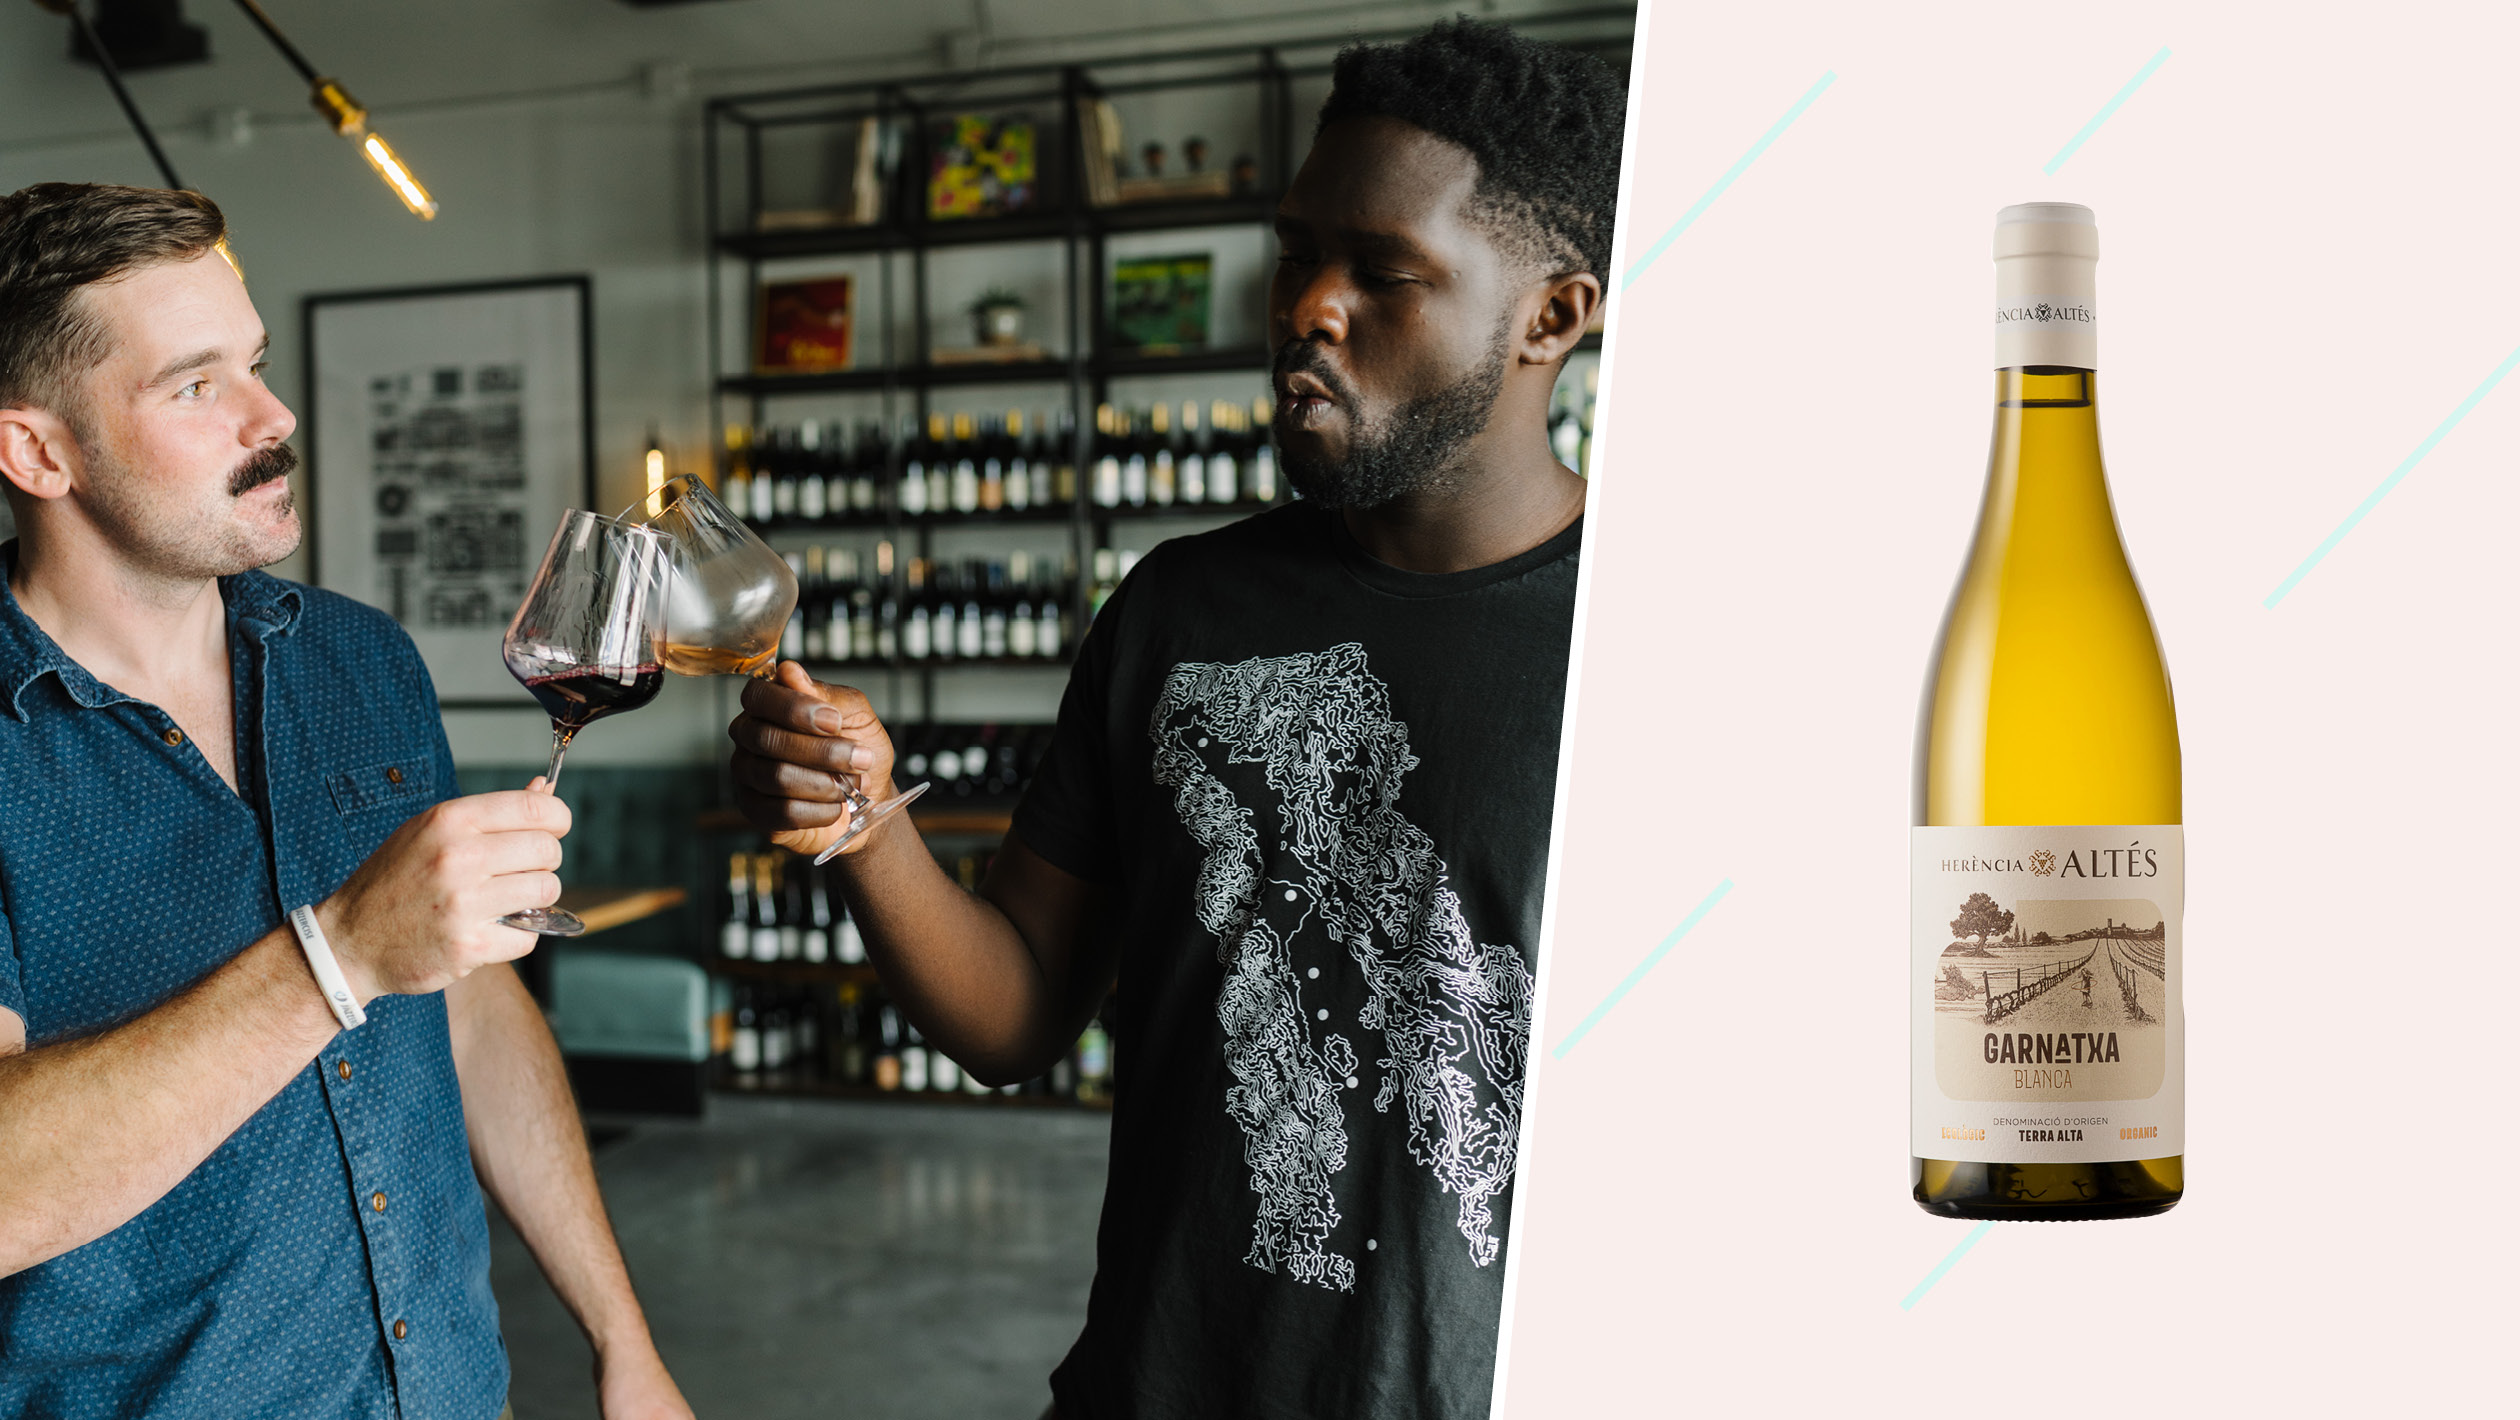 Herència Altés Garnatxa Blanca, selected by Femi Oyediran, the sommelier and co-owner of Graft Wine Shop. Photo (left) credit: Olivia Rae, and photo (right) courtesy of European Cellars.